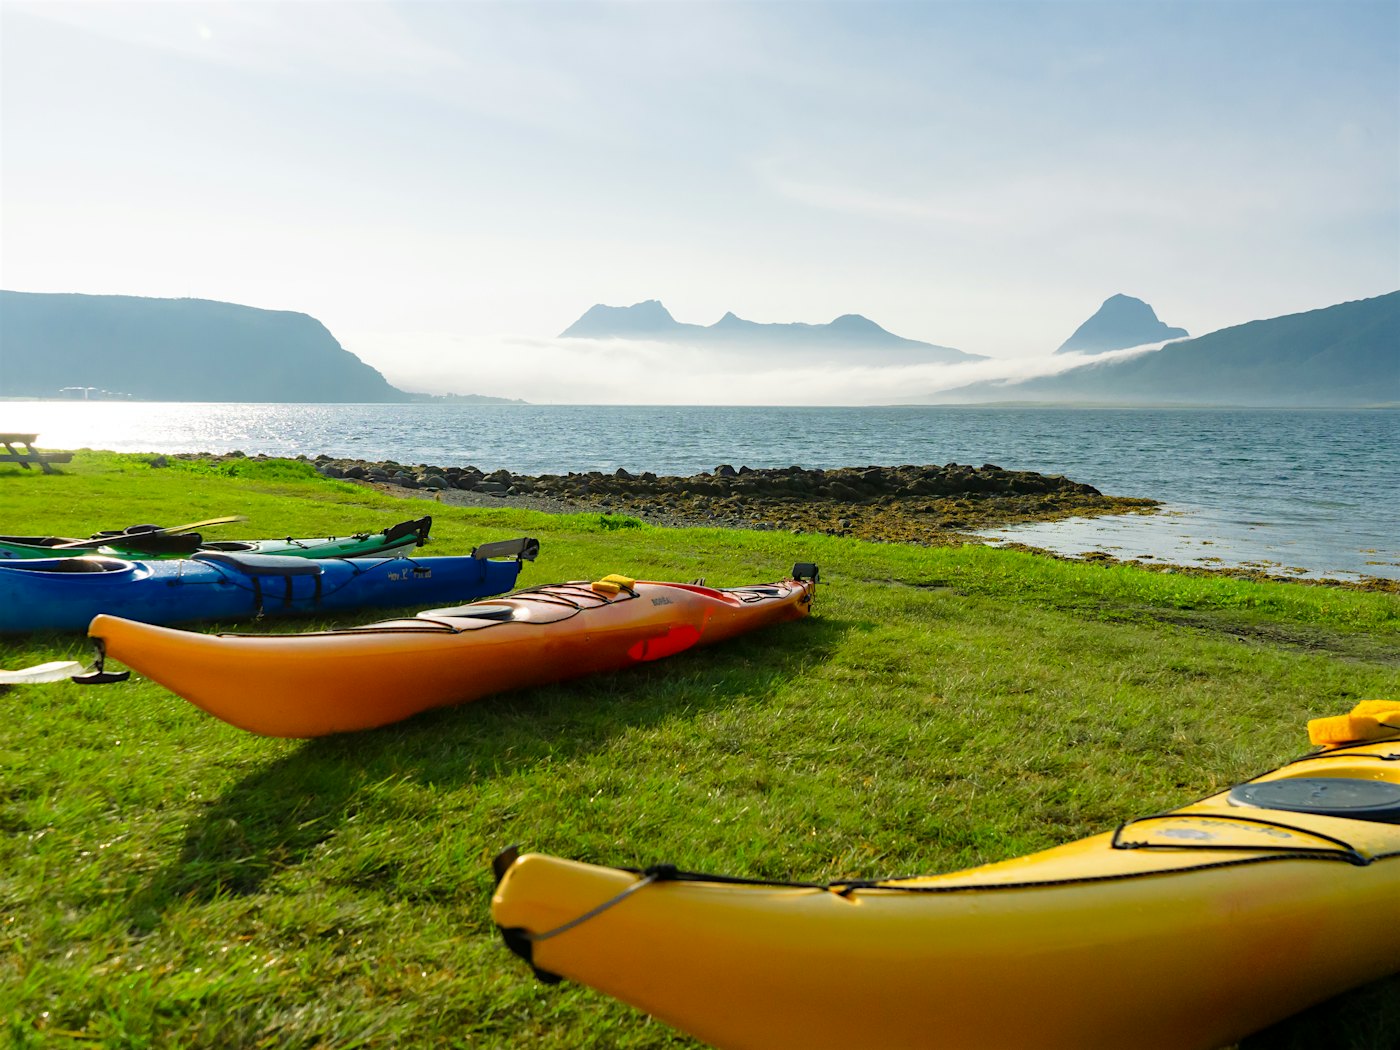 Four kayaks lie on a lawn in front of the sea, with mountains in the background. Photo